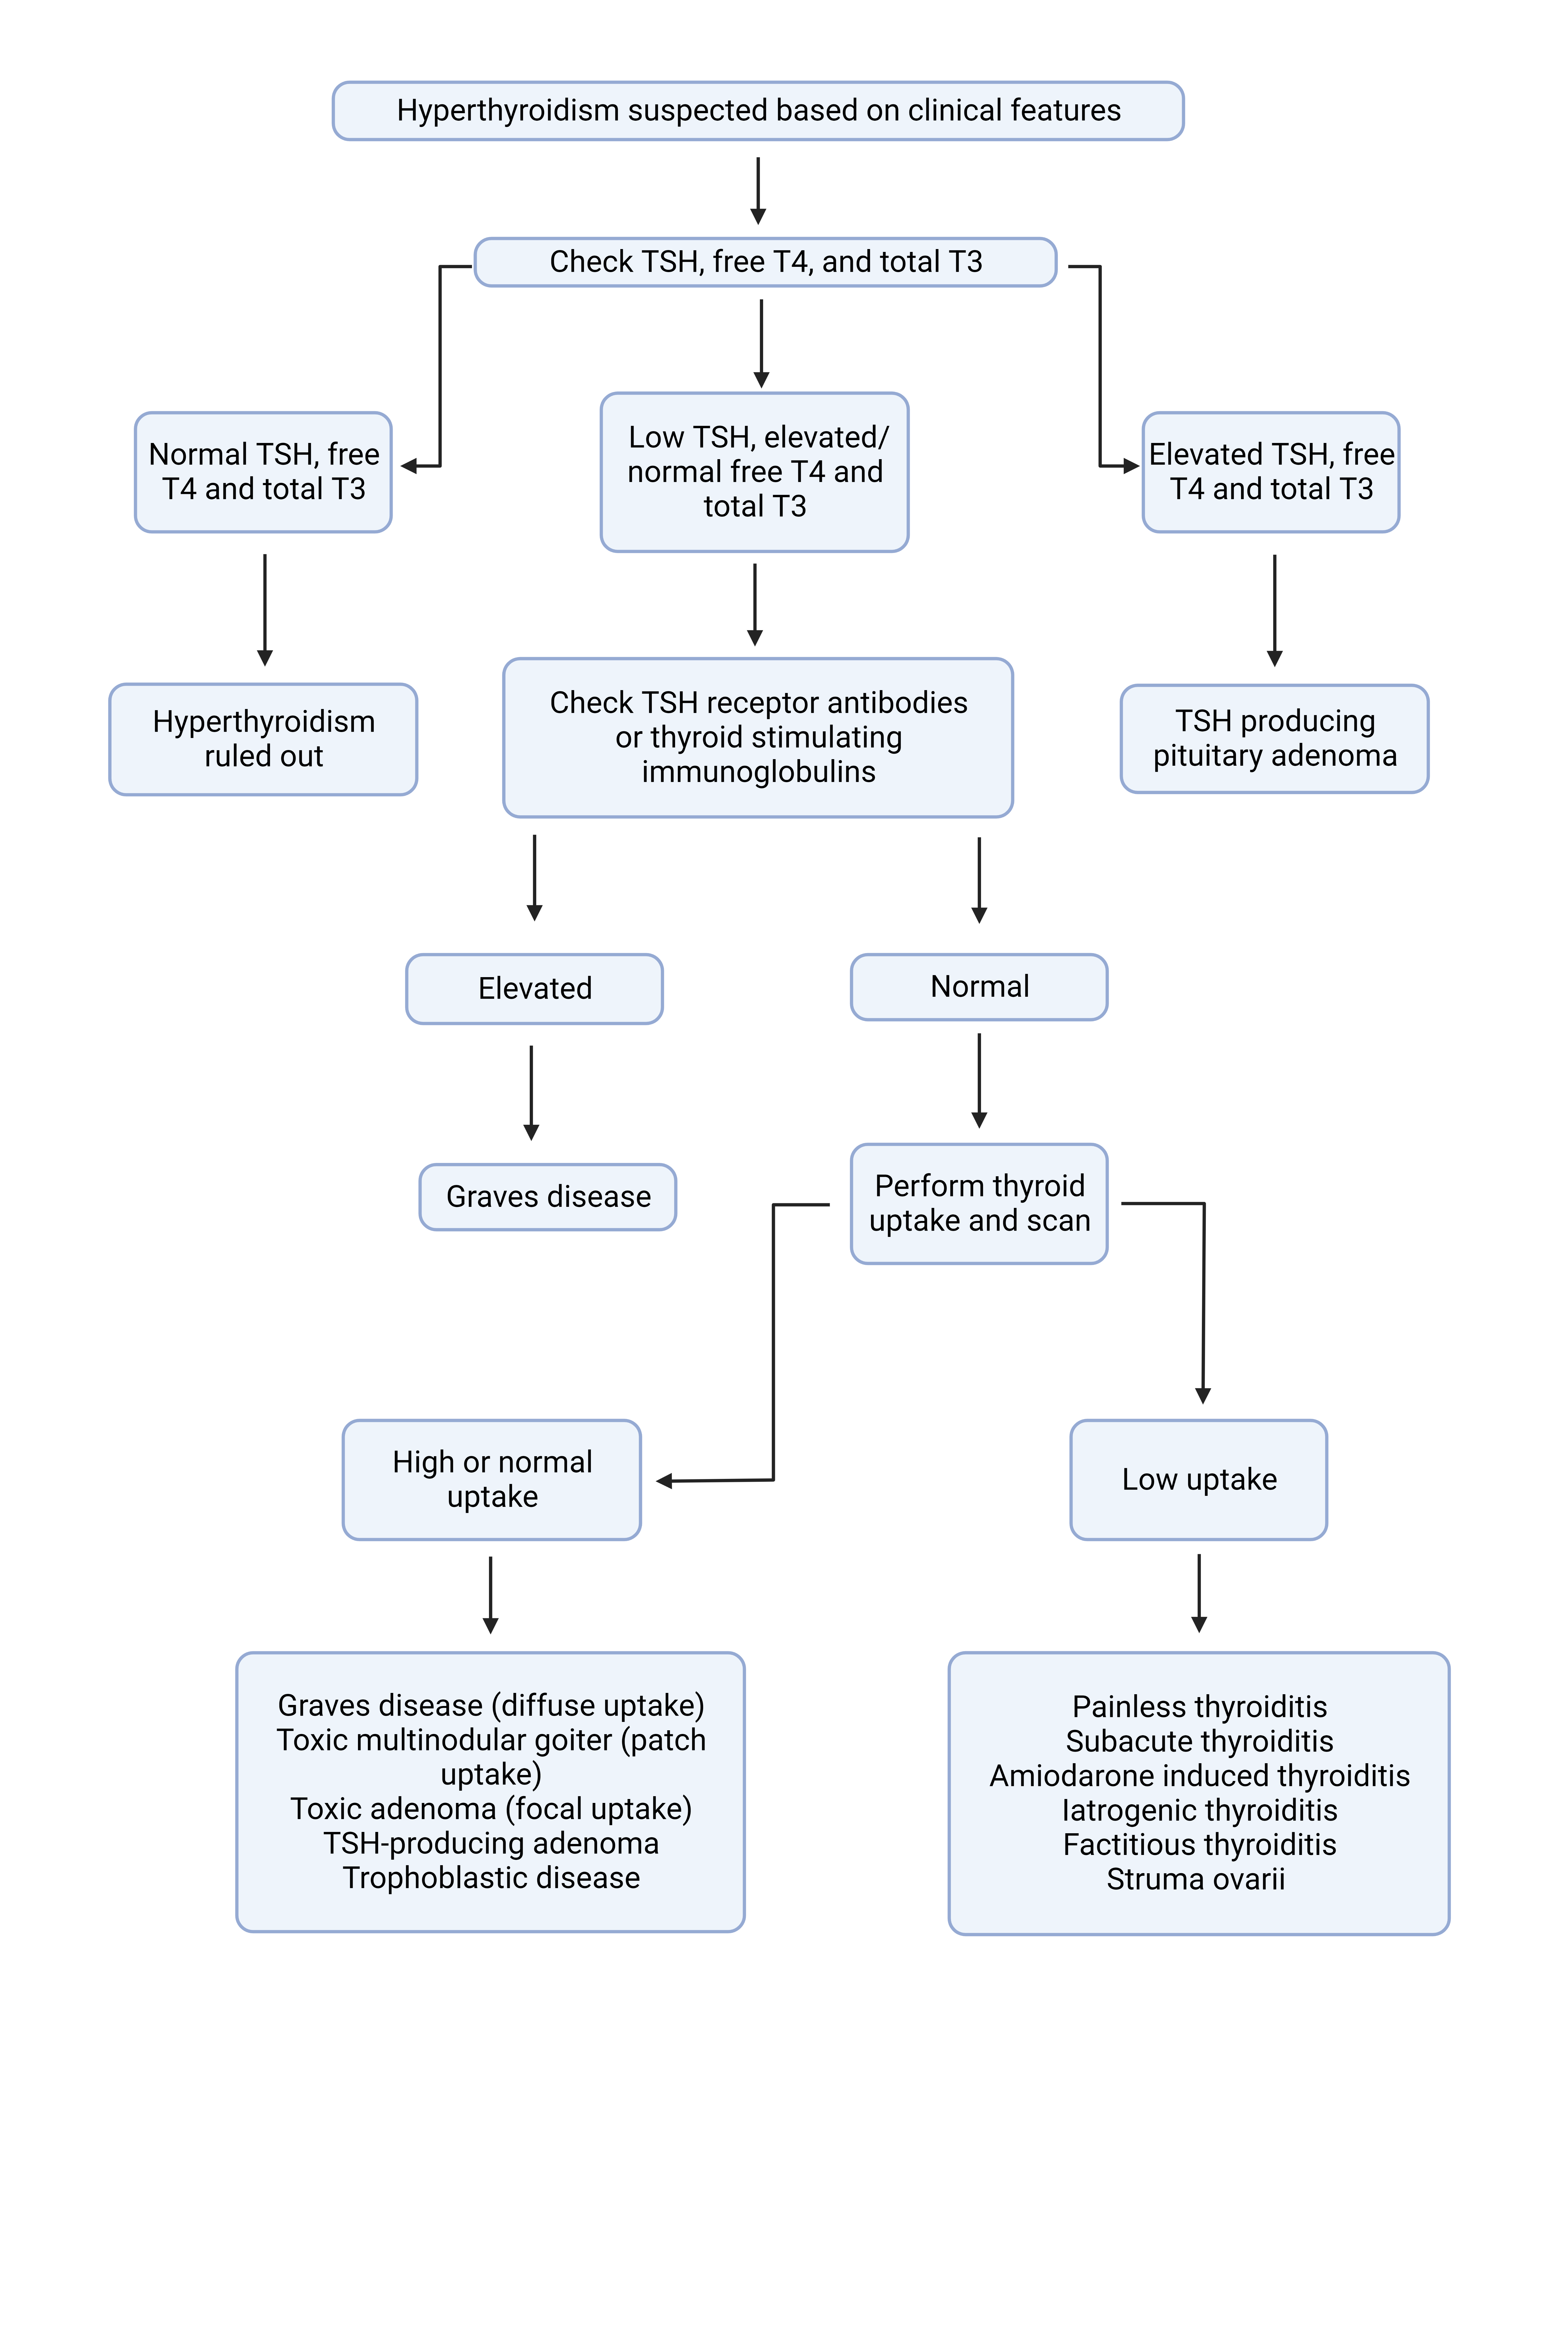 Algorithm for evaluation of patients presenting with hyperthyroidism